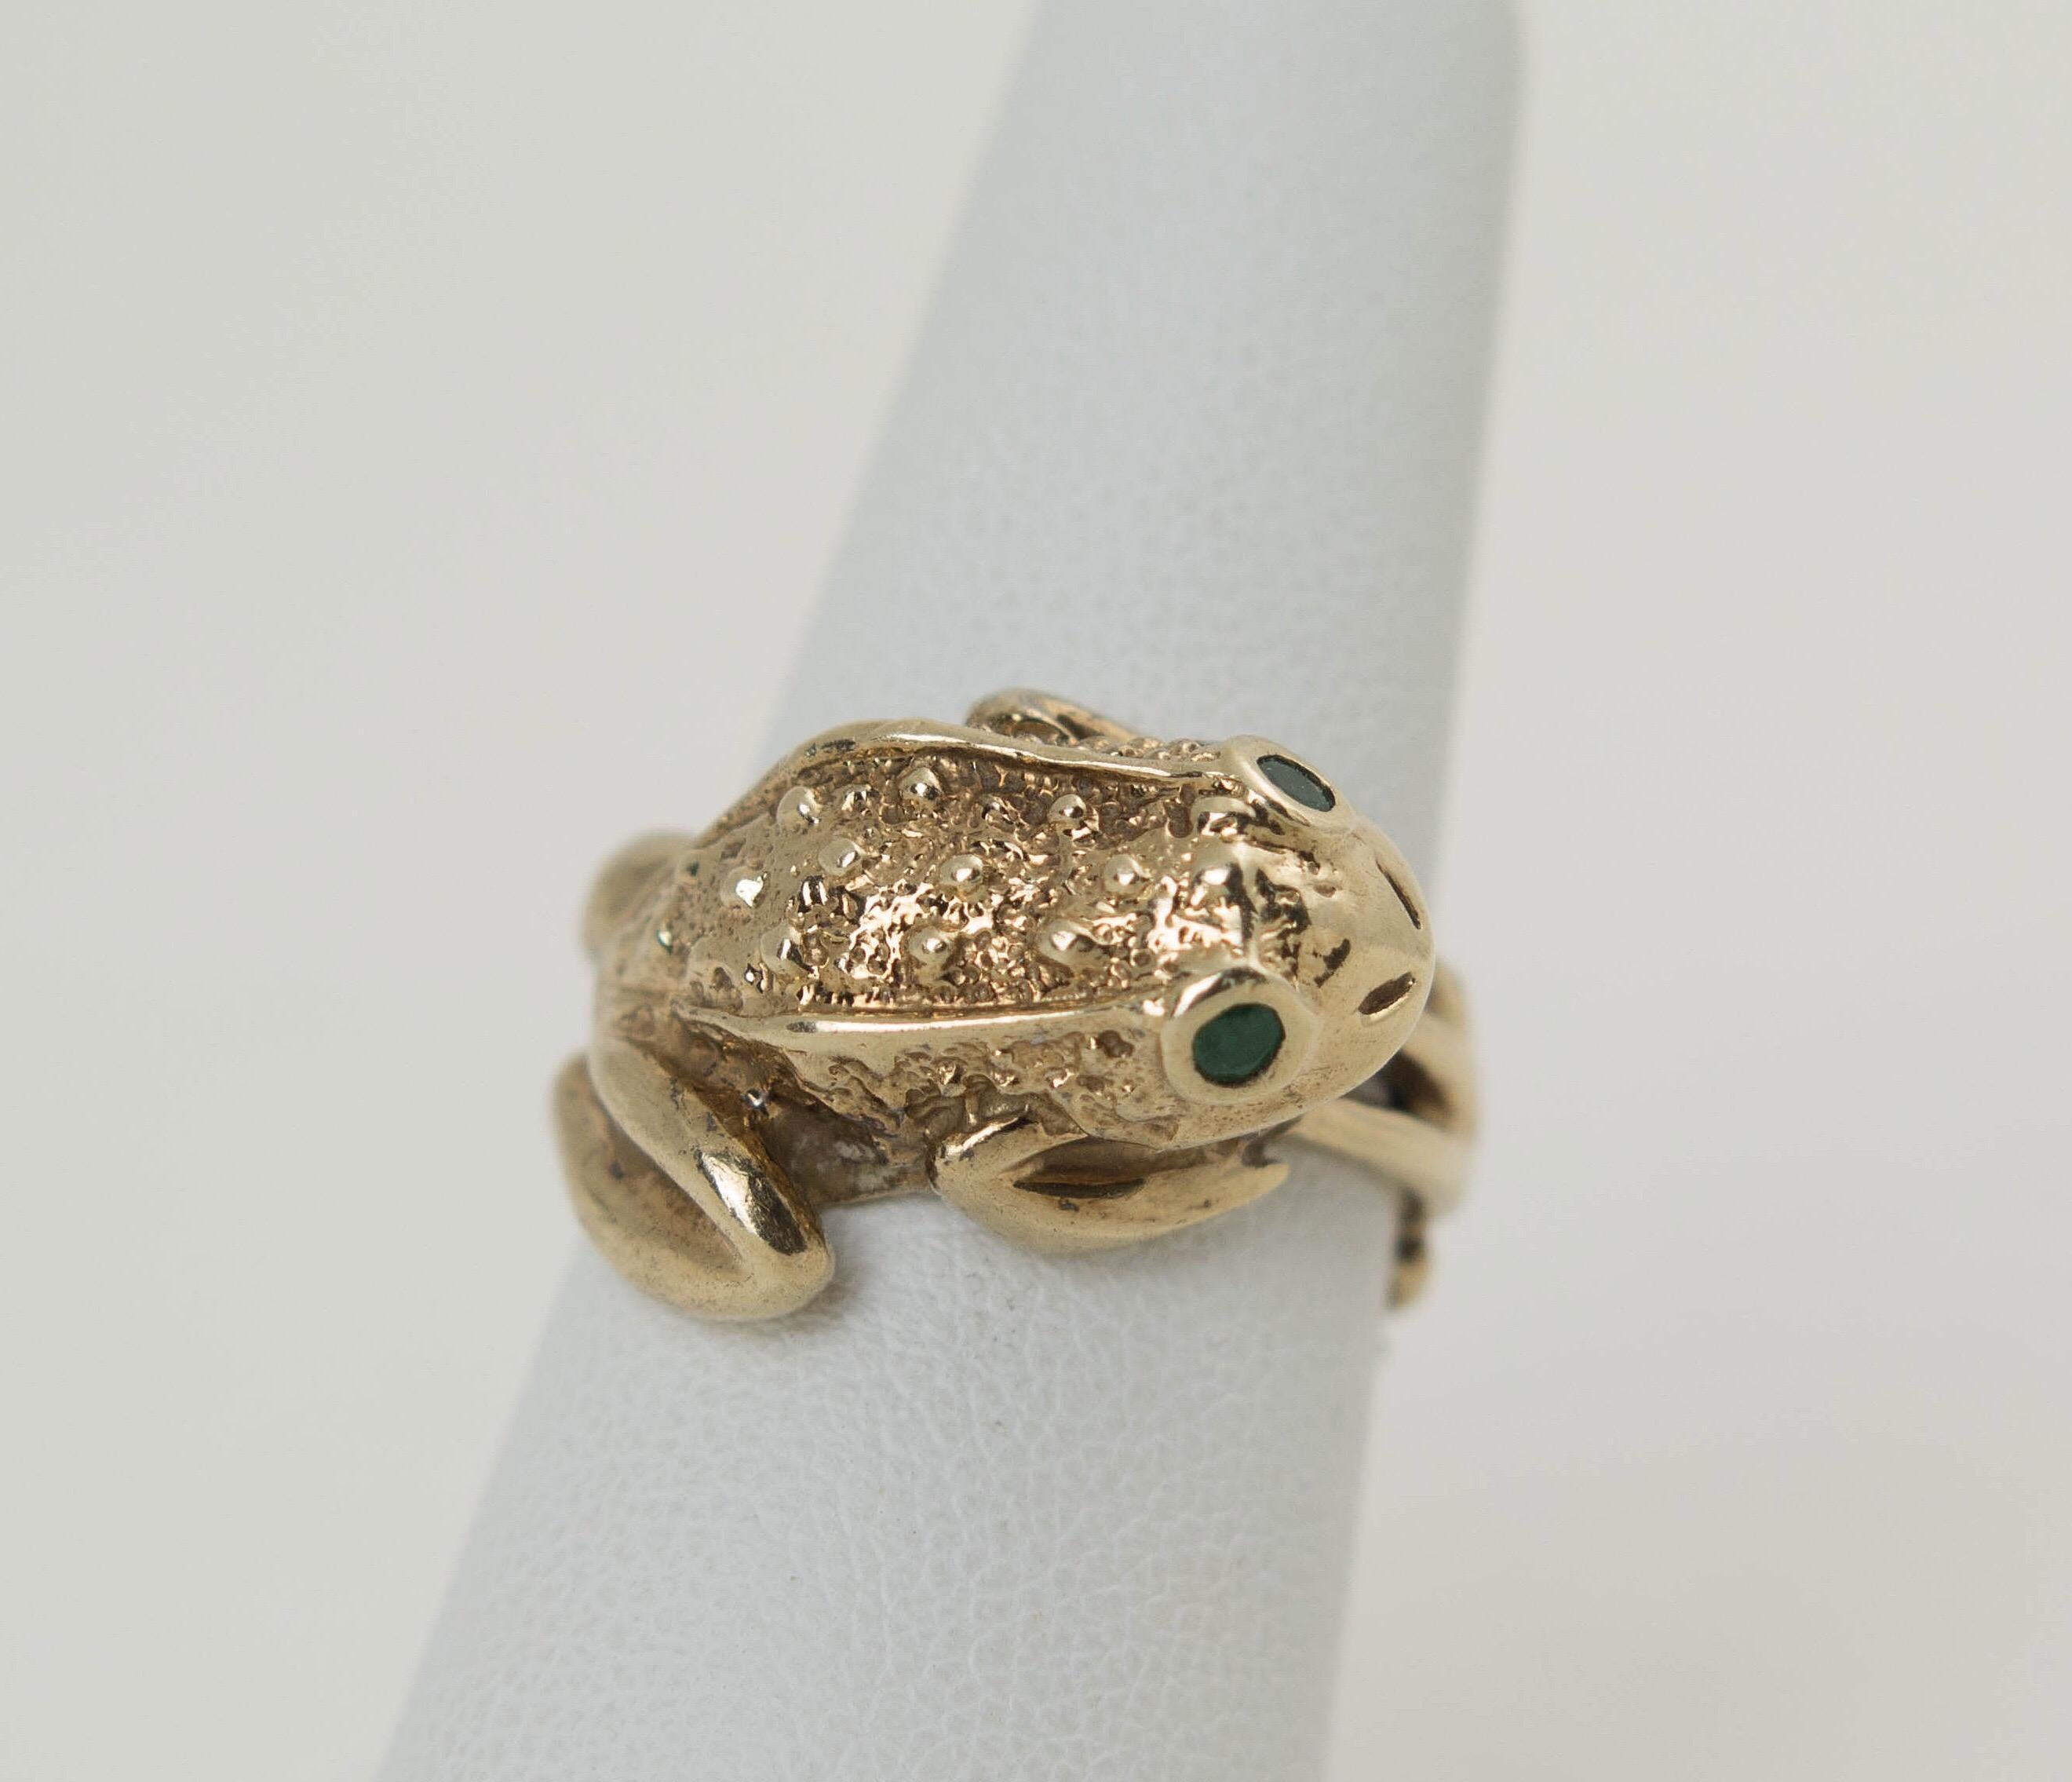 A whimsical vintage 14K gold ring in a form of a frog. The frog has a pair of emerald eyes and textured gold body. its elongated legs wrap around as the ring shank, 
Marked 14K and maker's mark. Just a wonderful ring!
Ring size: 6.5. Weight: 8.8